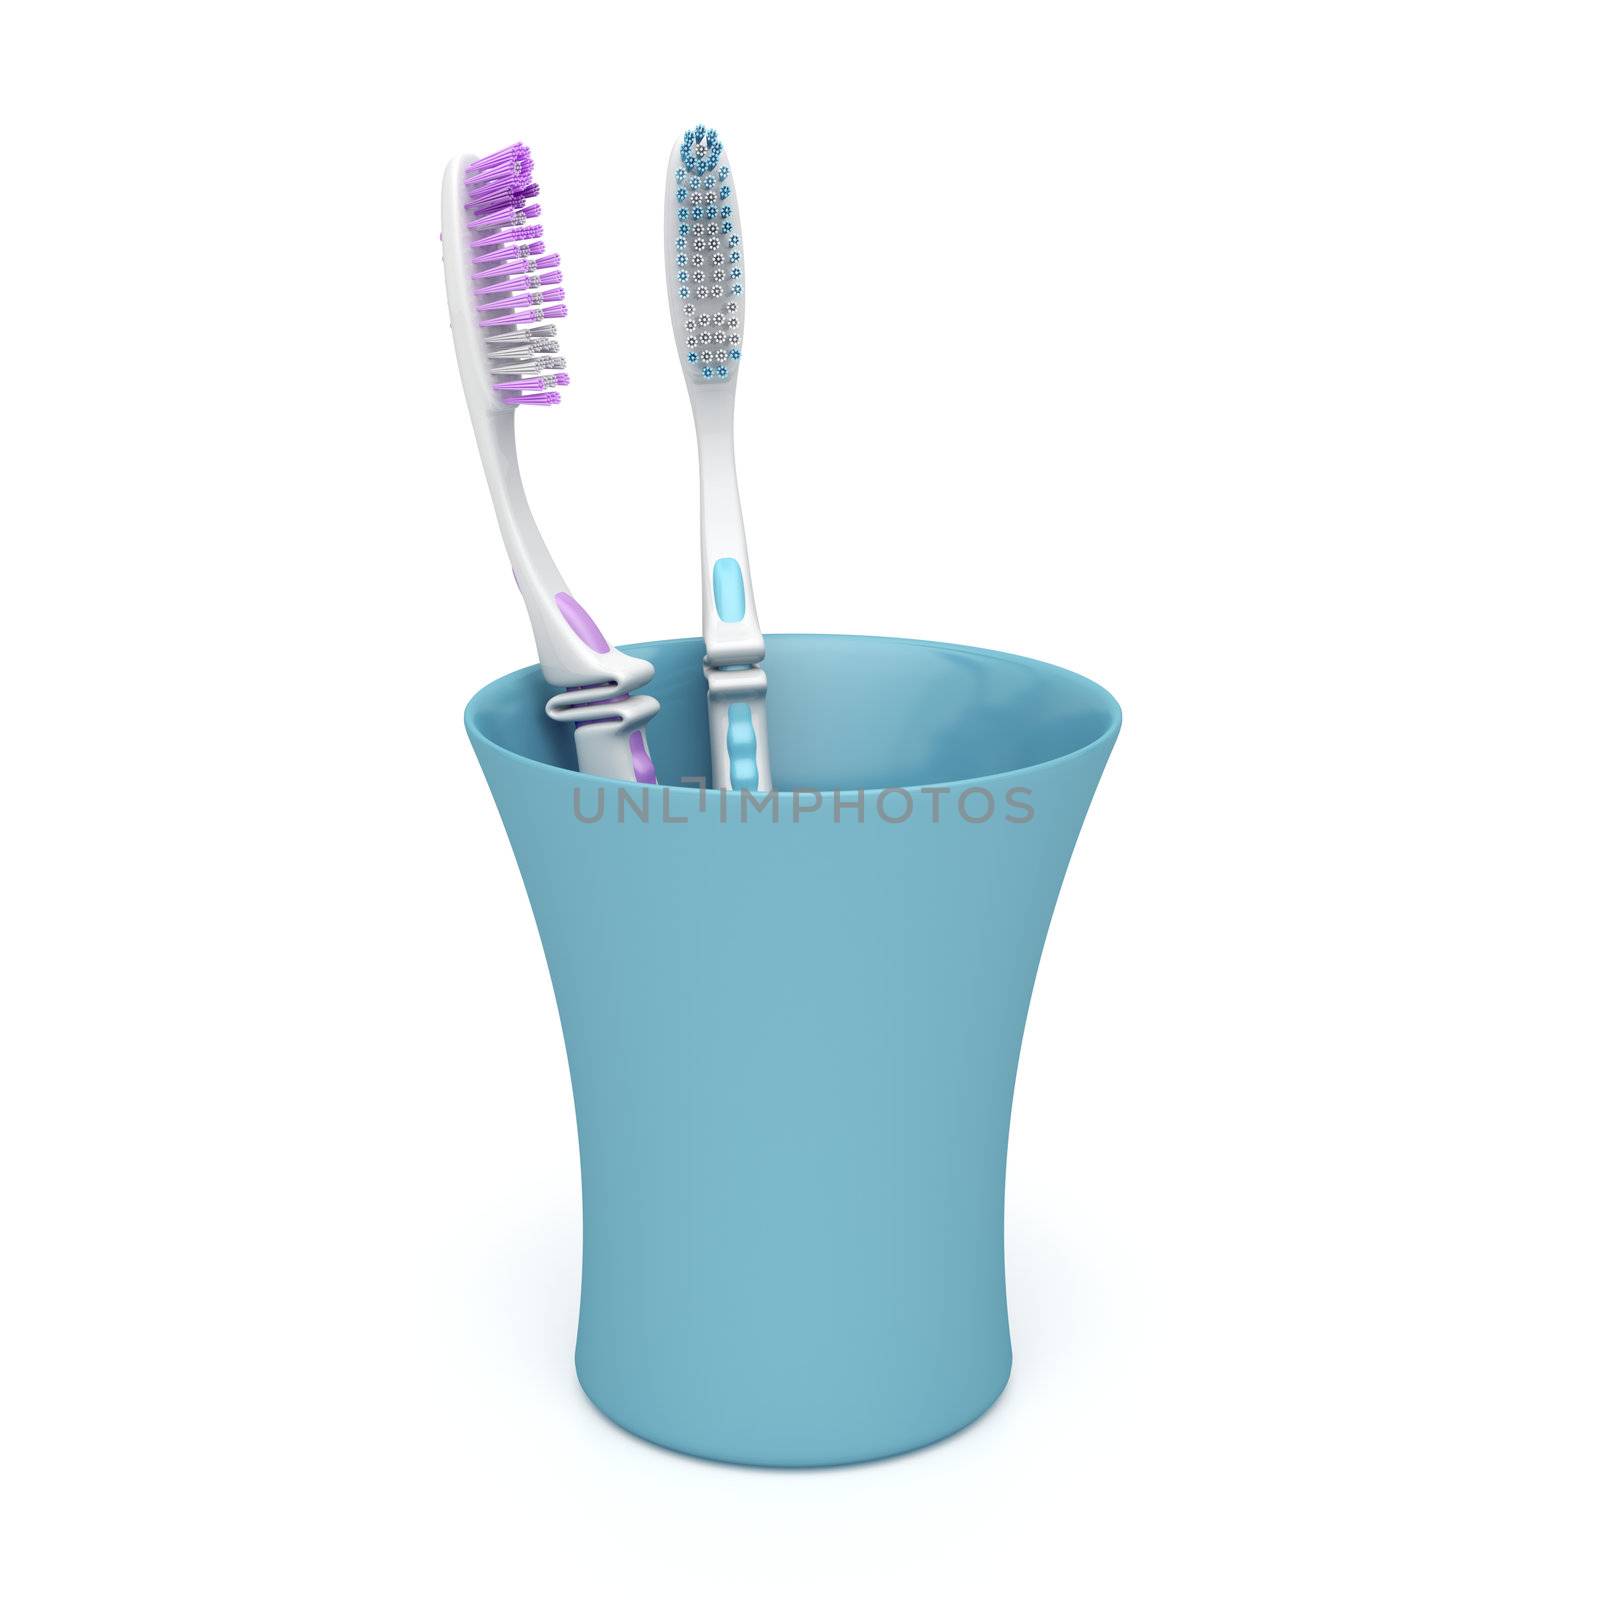 Two toothbrushes in a plastic cup